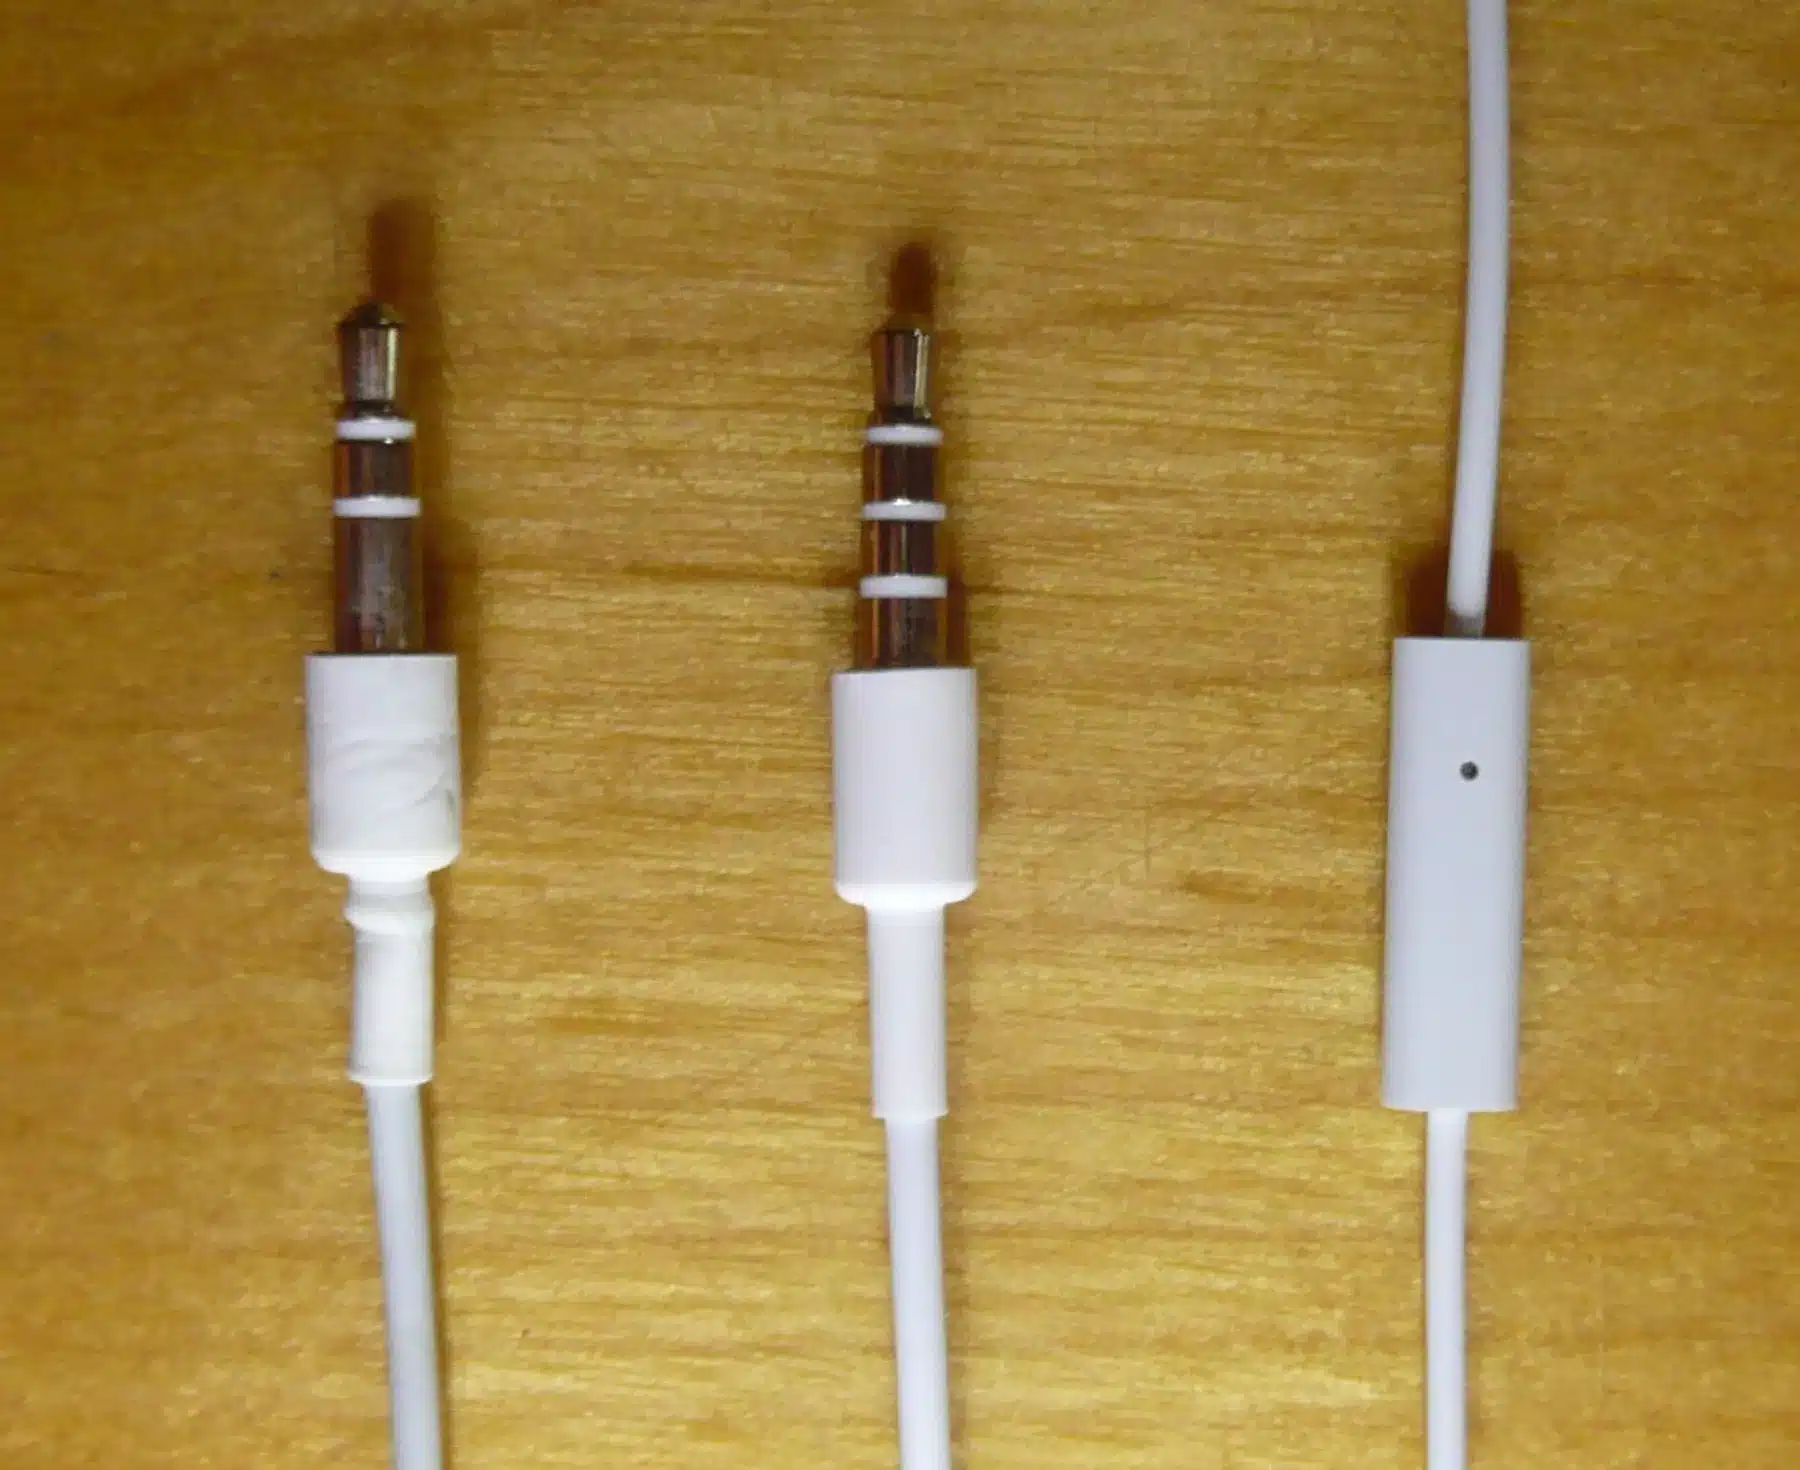 File:IPod and iPhone audio plugs.JPG - three white and brown cables on a wooden surface